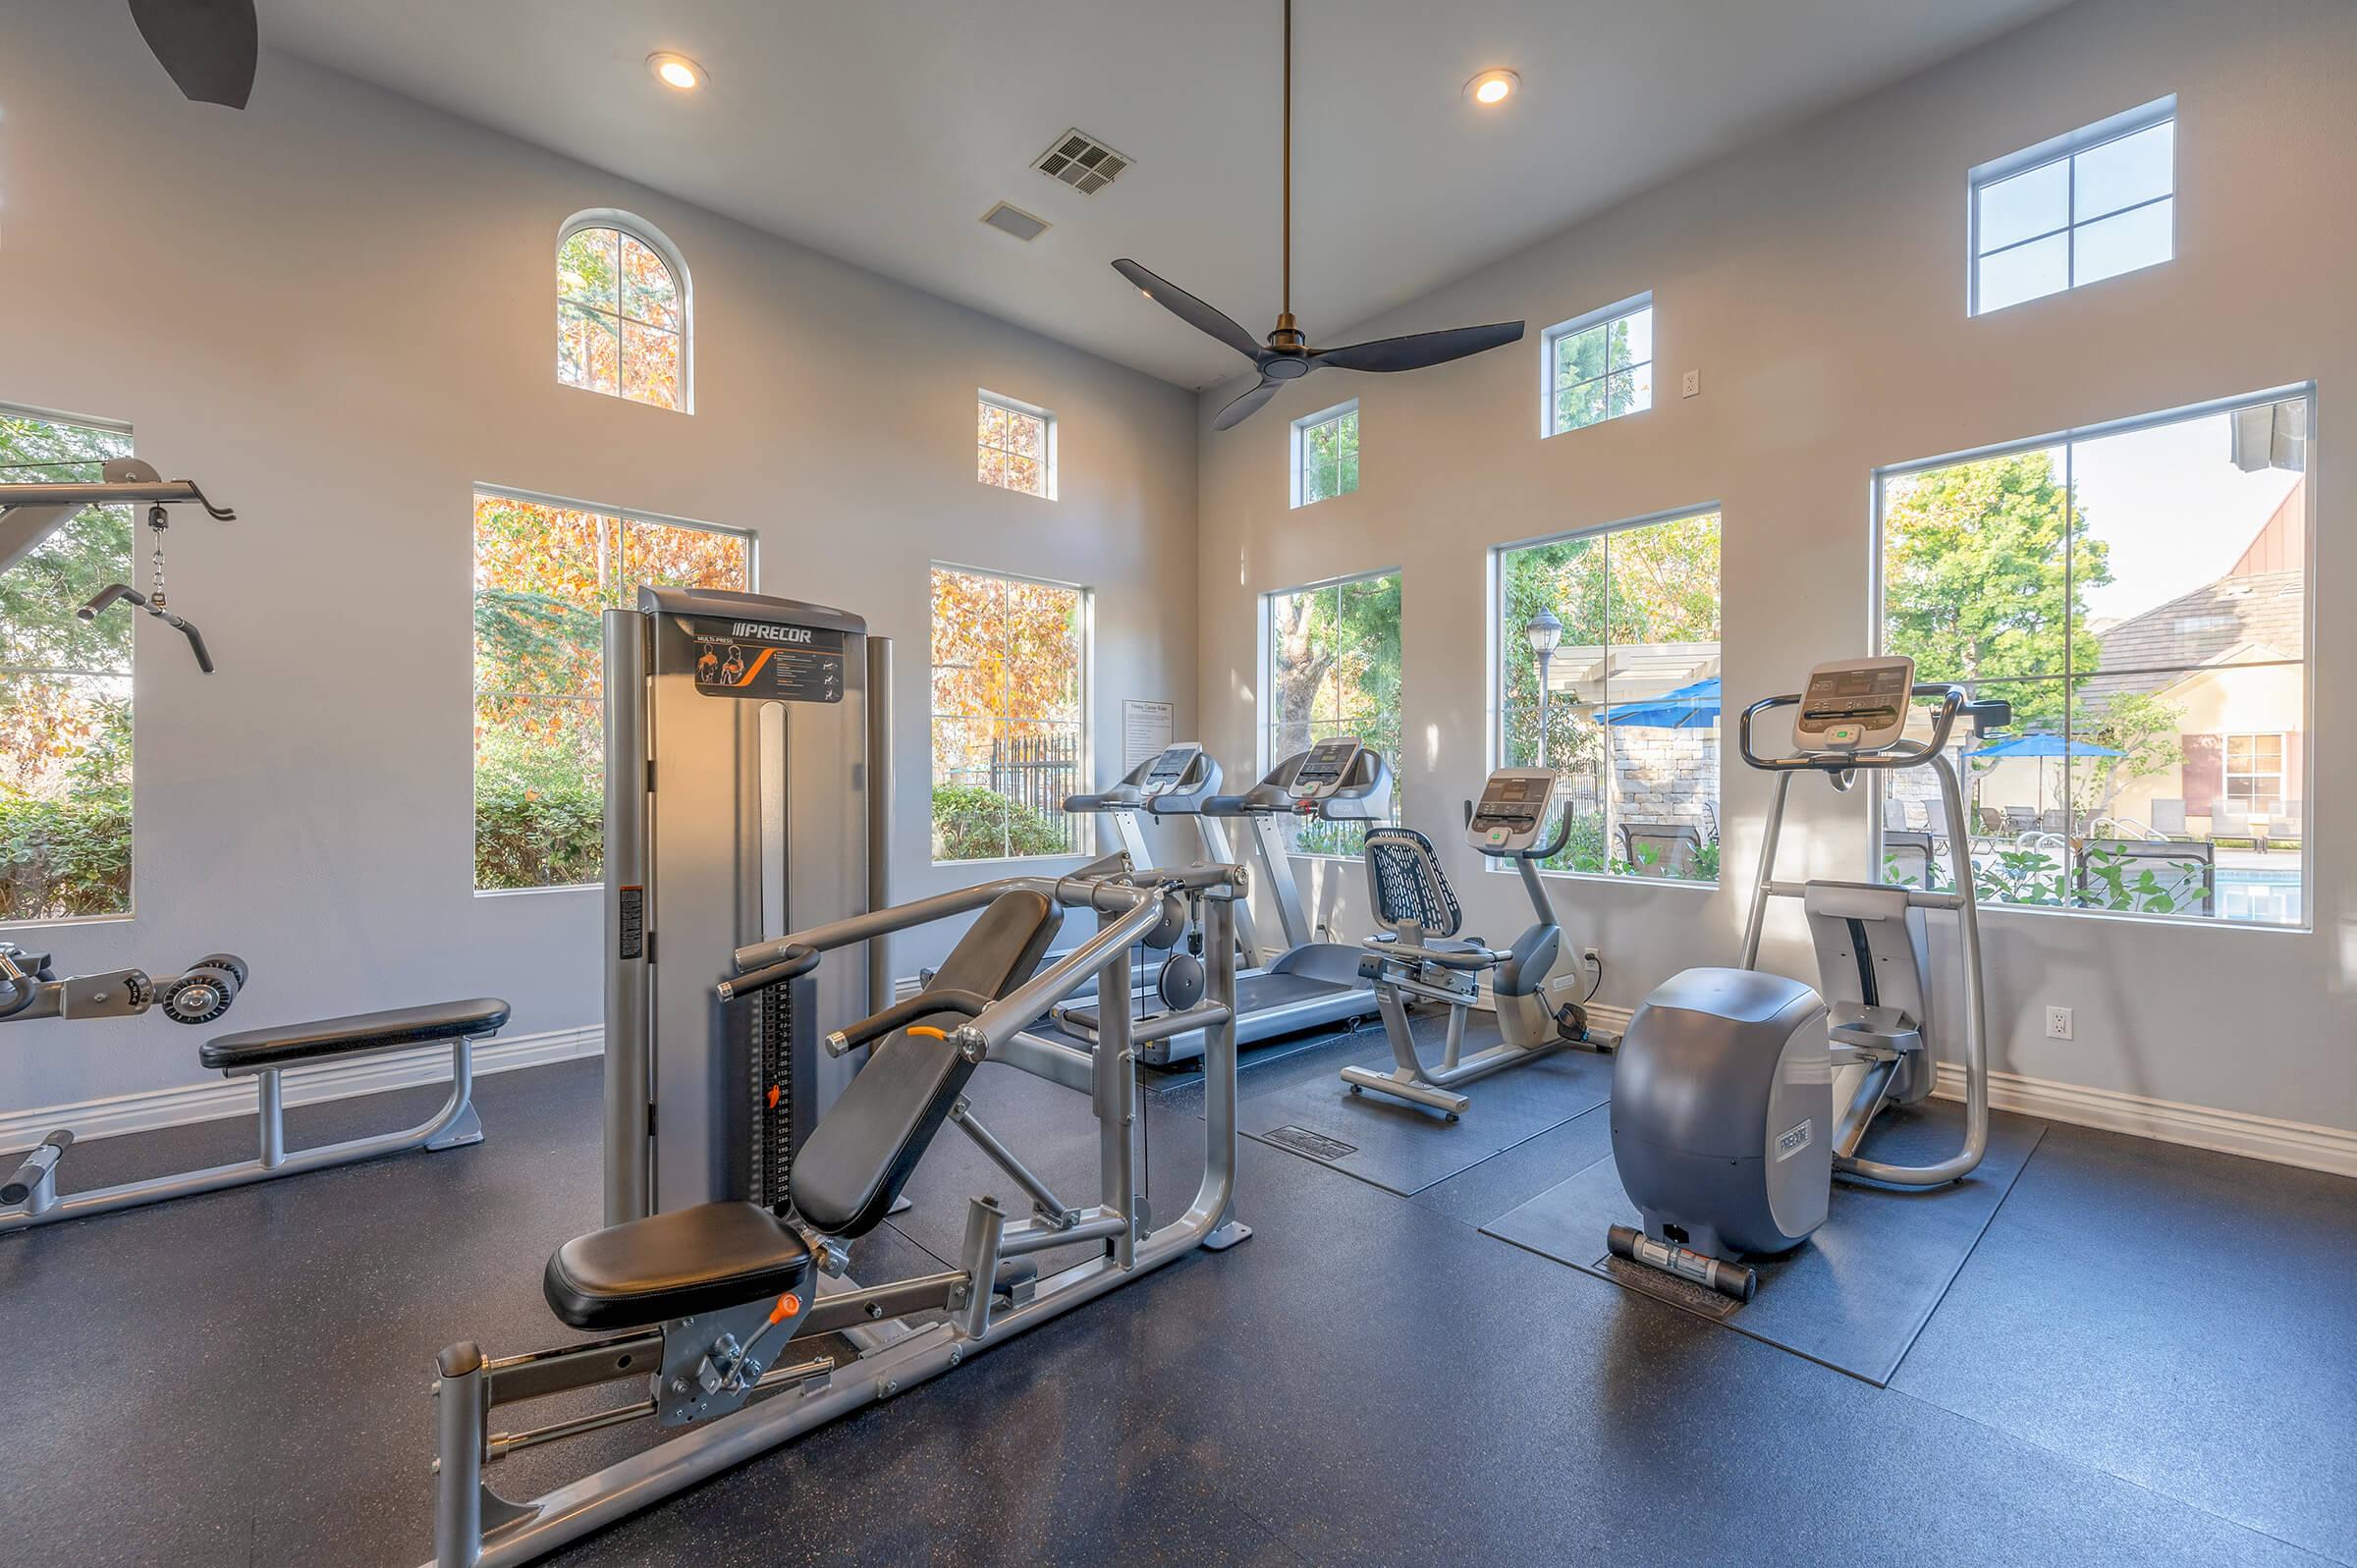 Fitness center at Laurel Terrace Apartment Homes